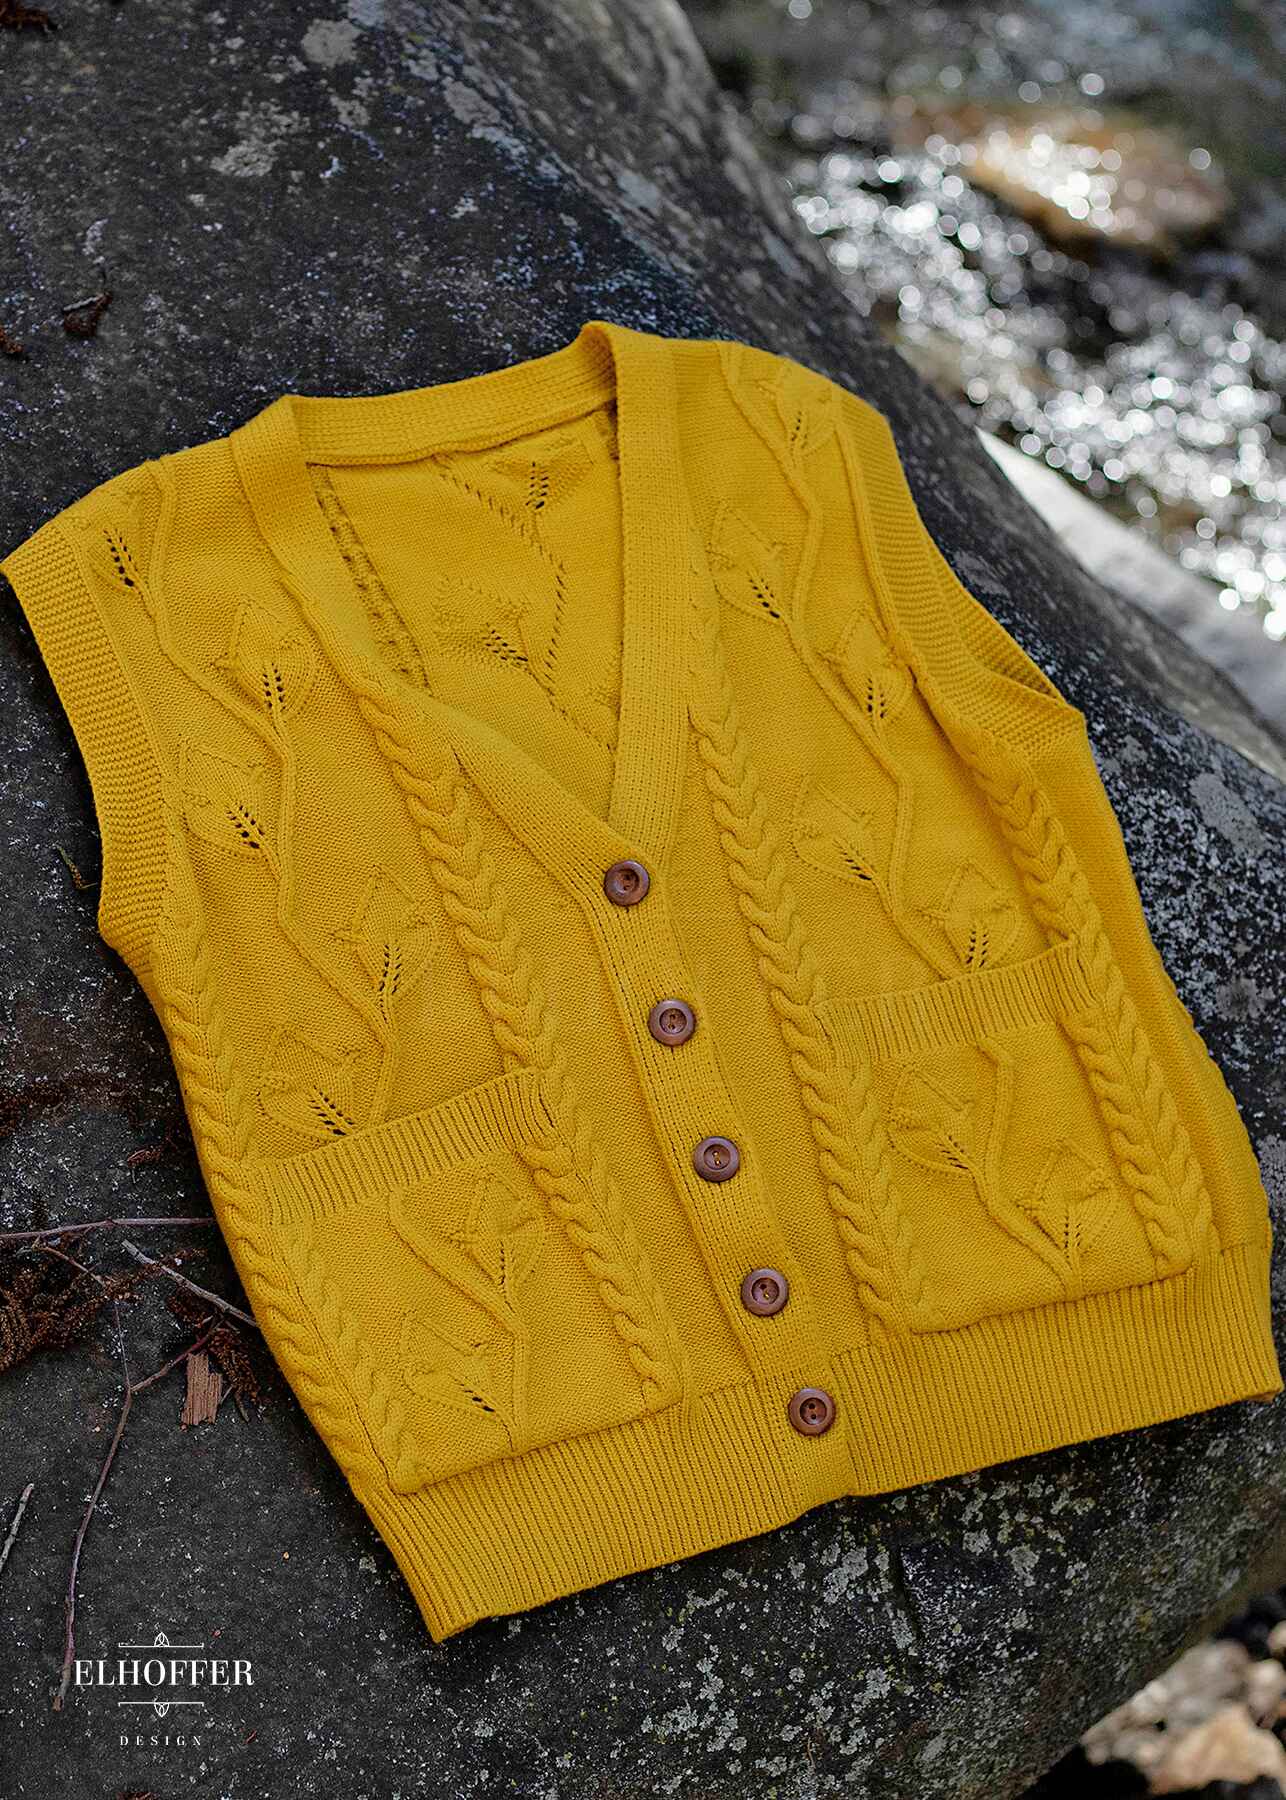 A golden yellow button up knit vest with a leafy vine and cable knit pattern, light brown buttons, and front pockets laying flat on a rock in the woods.